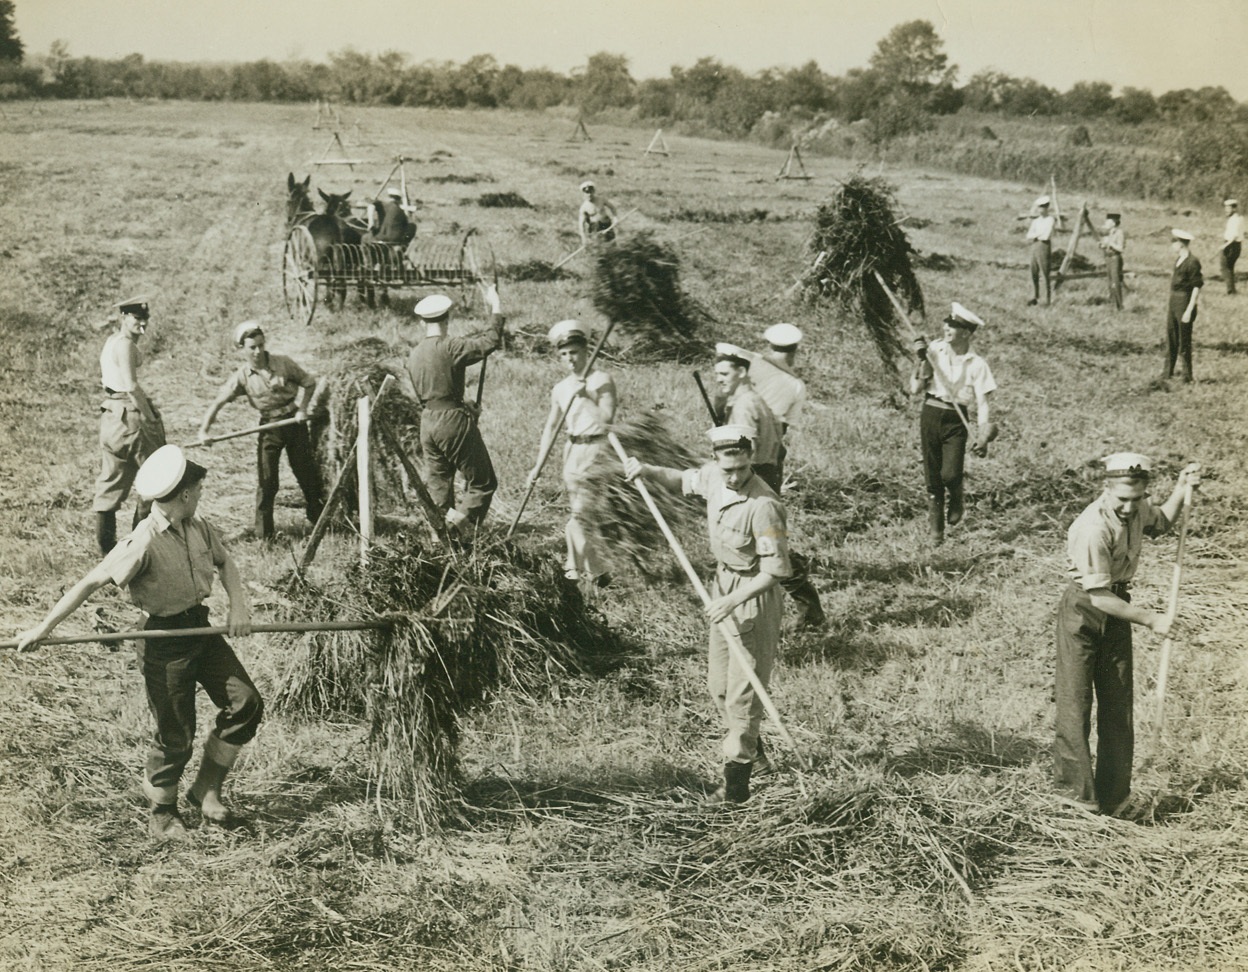 BRITISH SAILORS HARVEST AMERICAN CROPS, 10/23/1942. English sailors, on leave from a British man o’war in a U.S.  Navy yard for refitting, lend a hand by harvesting hay on a Virginia farm, where farm labor is at a premium.  The British Navy would not allow them to accept pay, but they were royally treated as they spent their leave in American country homes.Credit: Acme;